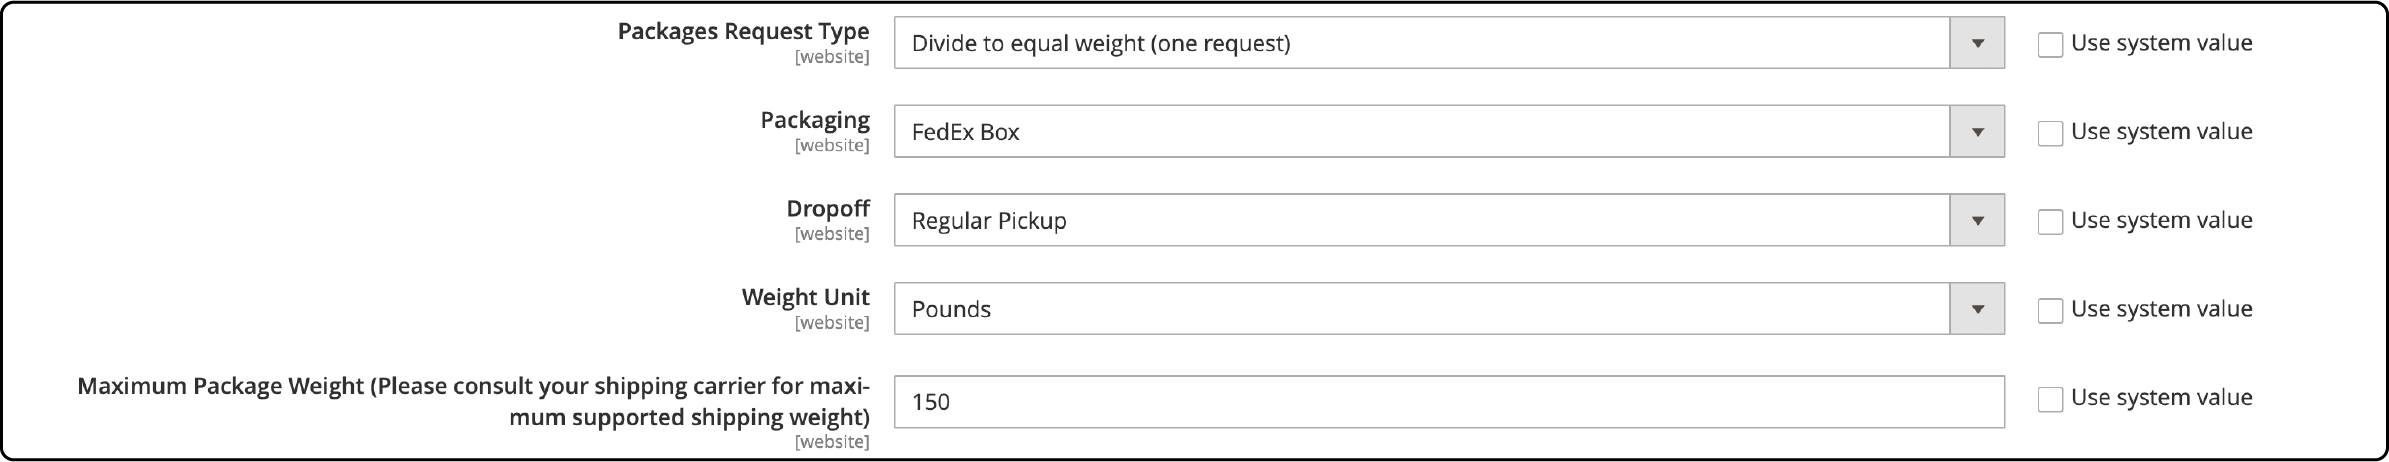 Configuring packaging description settings in Magento for FedEx shipping